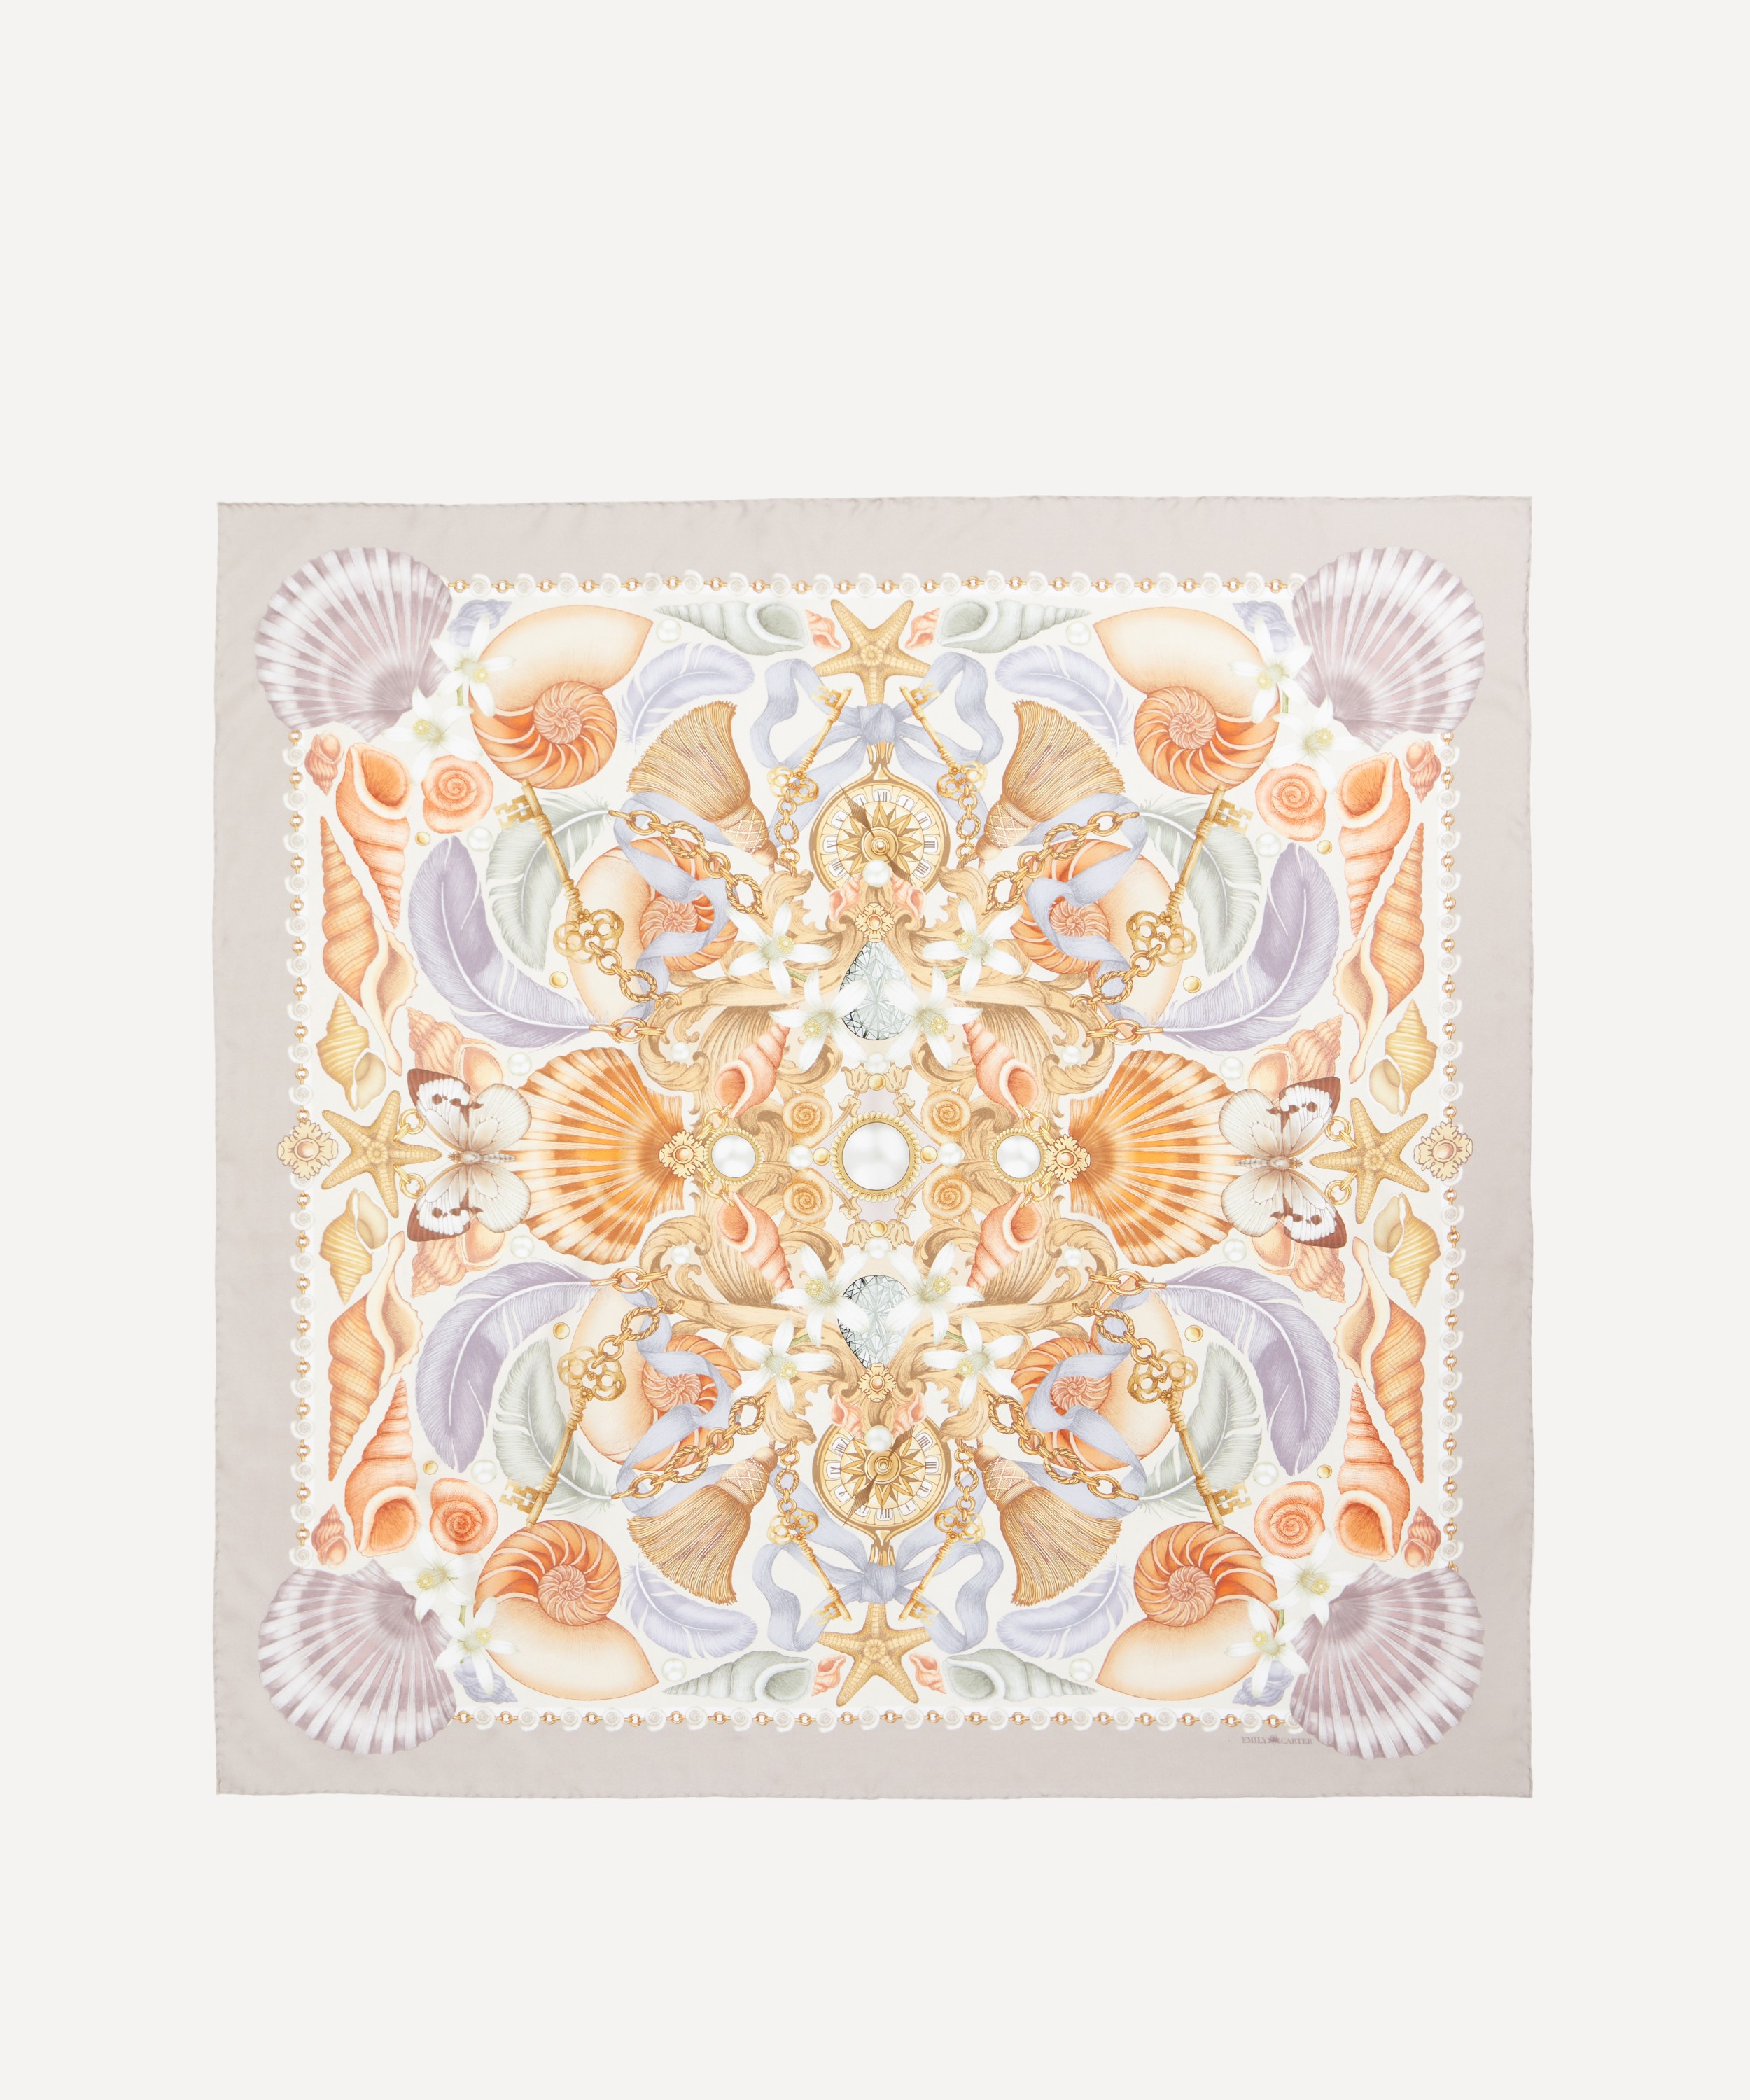 Emily Carter - The Shell and Starfish 90x90 Silk Scarf